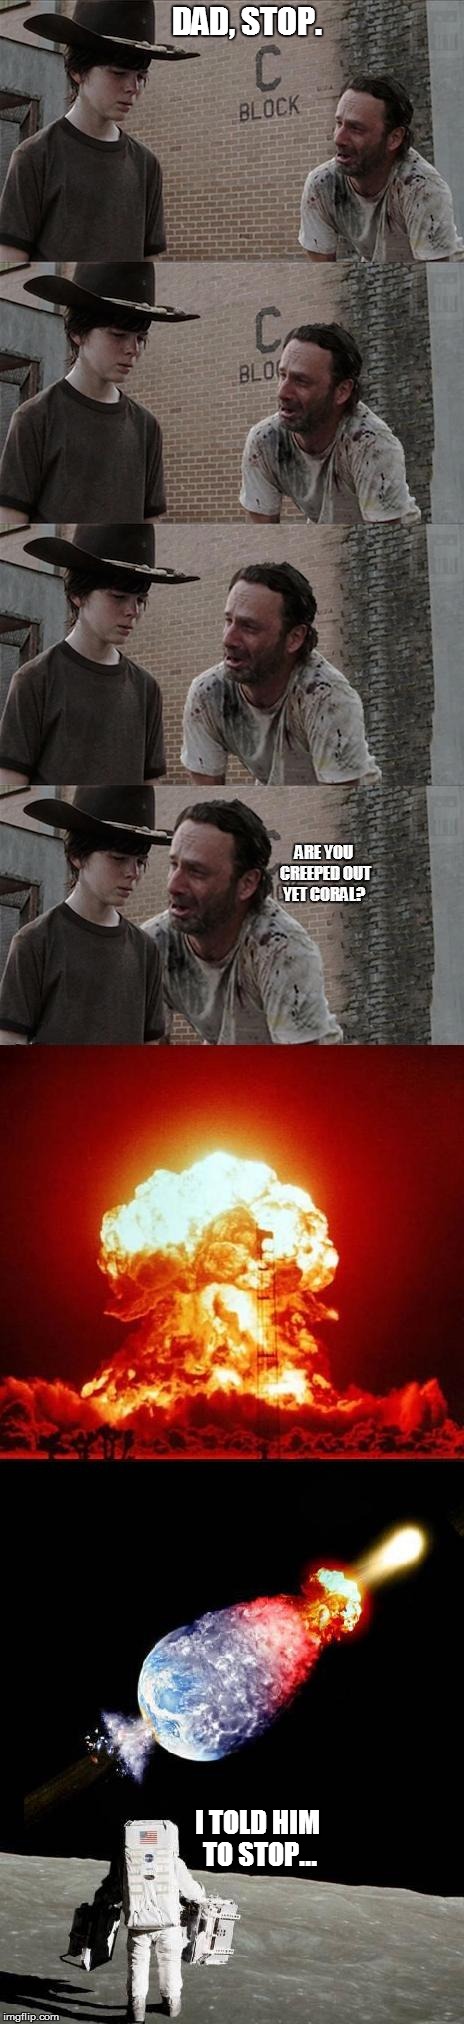 The Walking Dead: M. Night Shyamalan Edition | DAD, STOP. I TOLD HIM TO STOP... | image tagged in twist,coral,wtf,funny,original meme | made w/ Imgflip meme maker